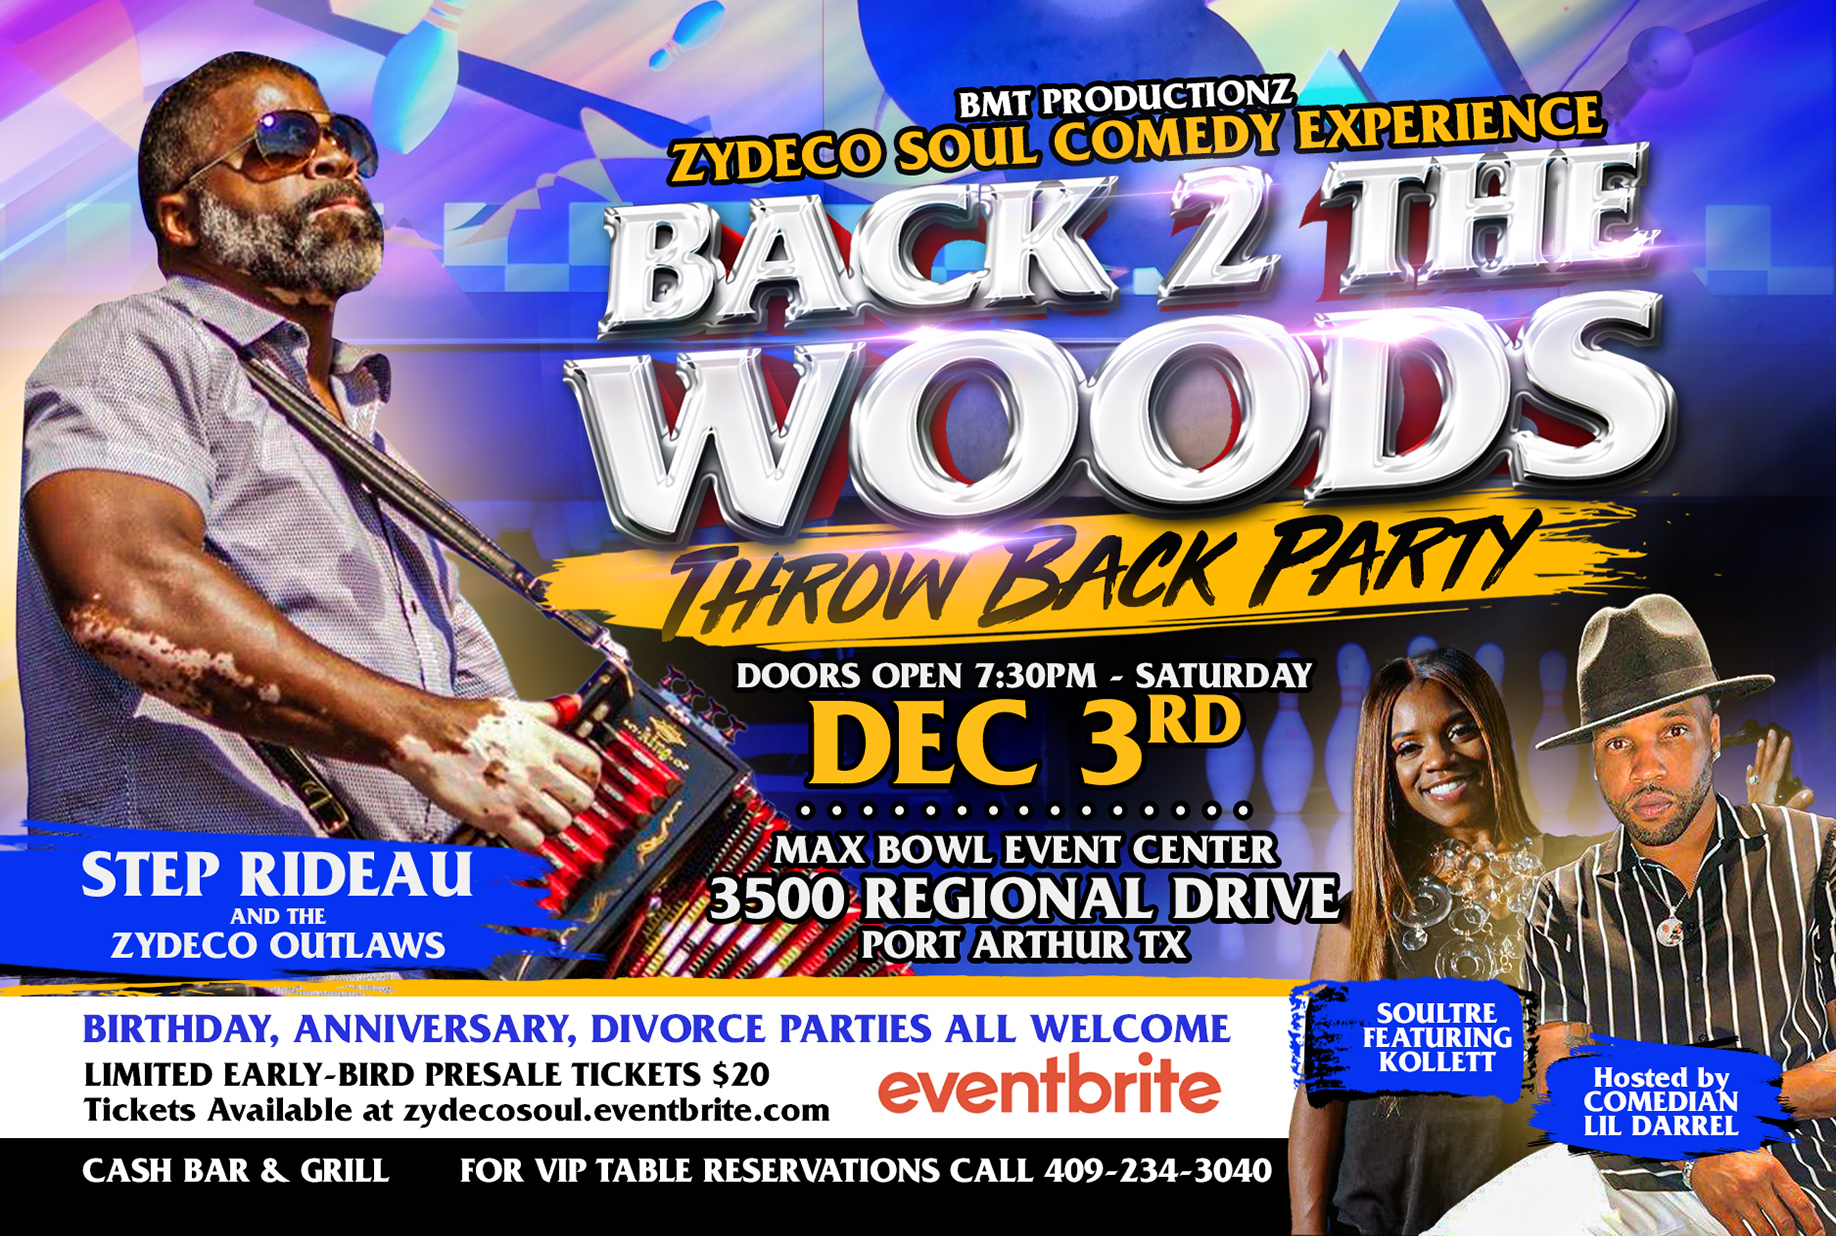 Zydeco Soul Comedy Experience Back 2 The Woods Throwback Party